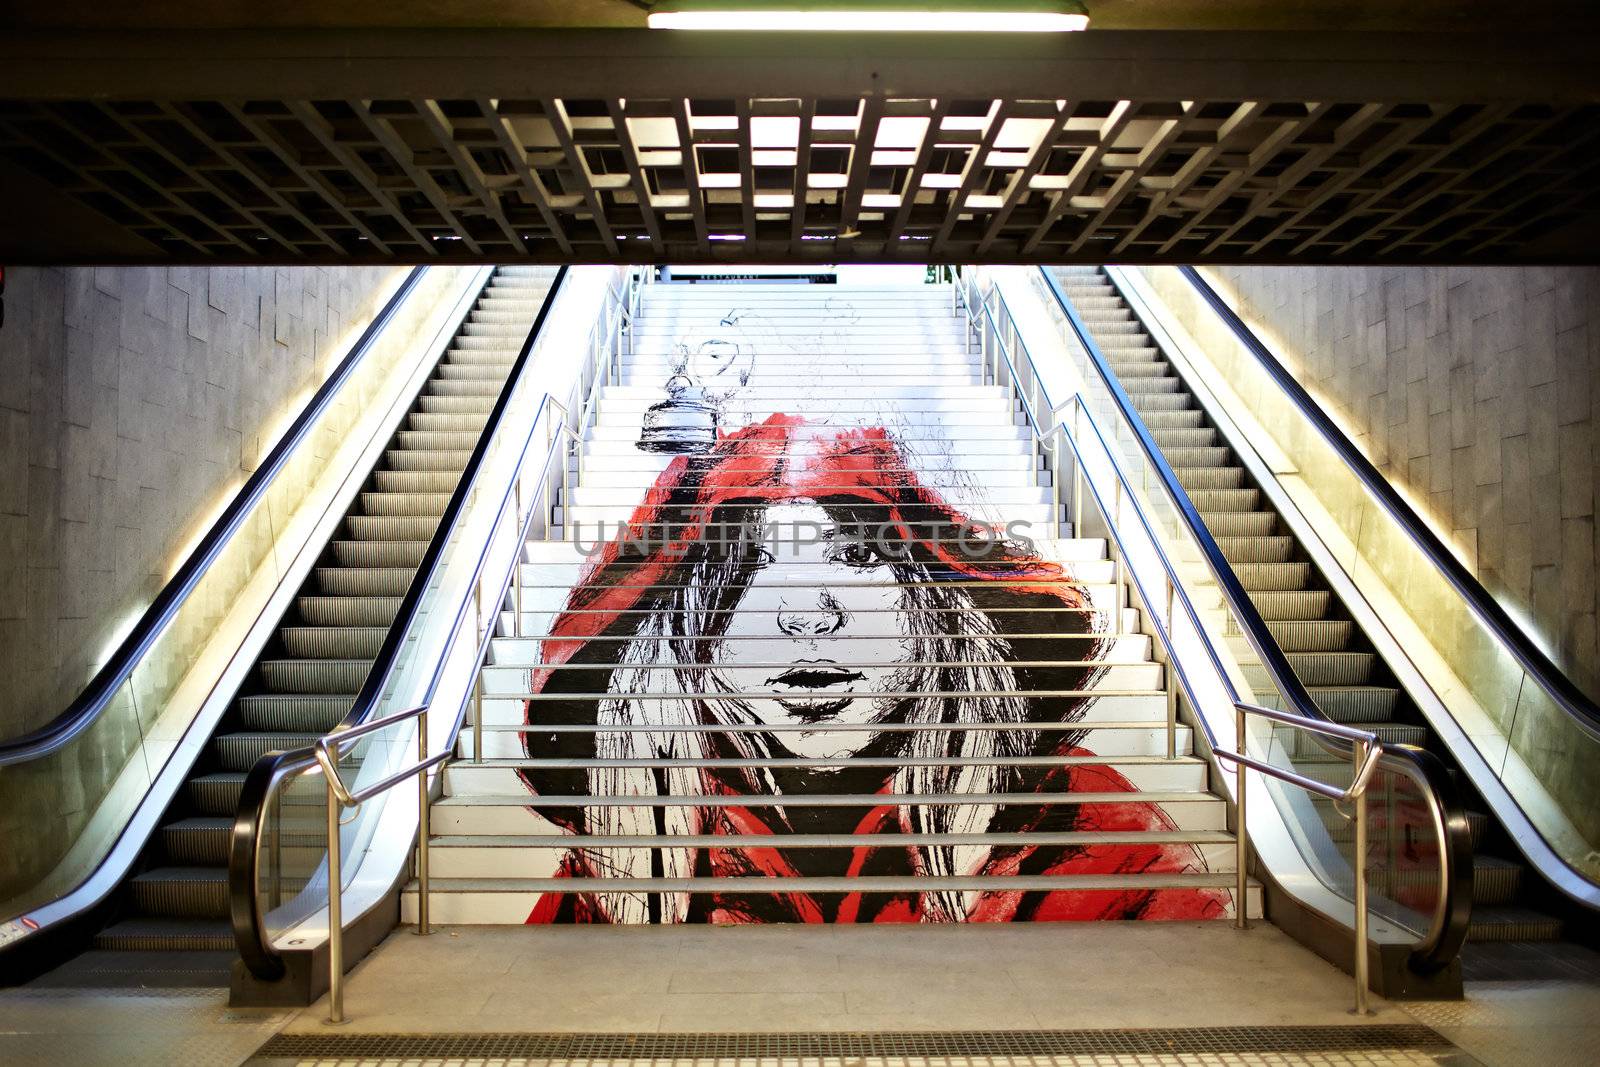 BARCELONA - MAY 23: Graffiti with the picture of a modern girl-teenager in a red loose overall on the steps of the Metro on May, 23, 2012 in Barcelona, Spain.